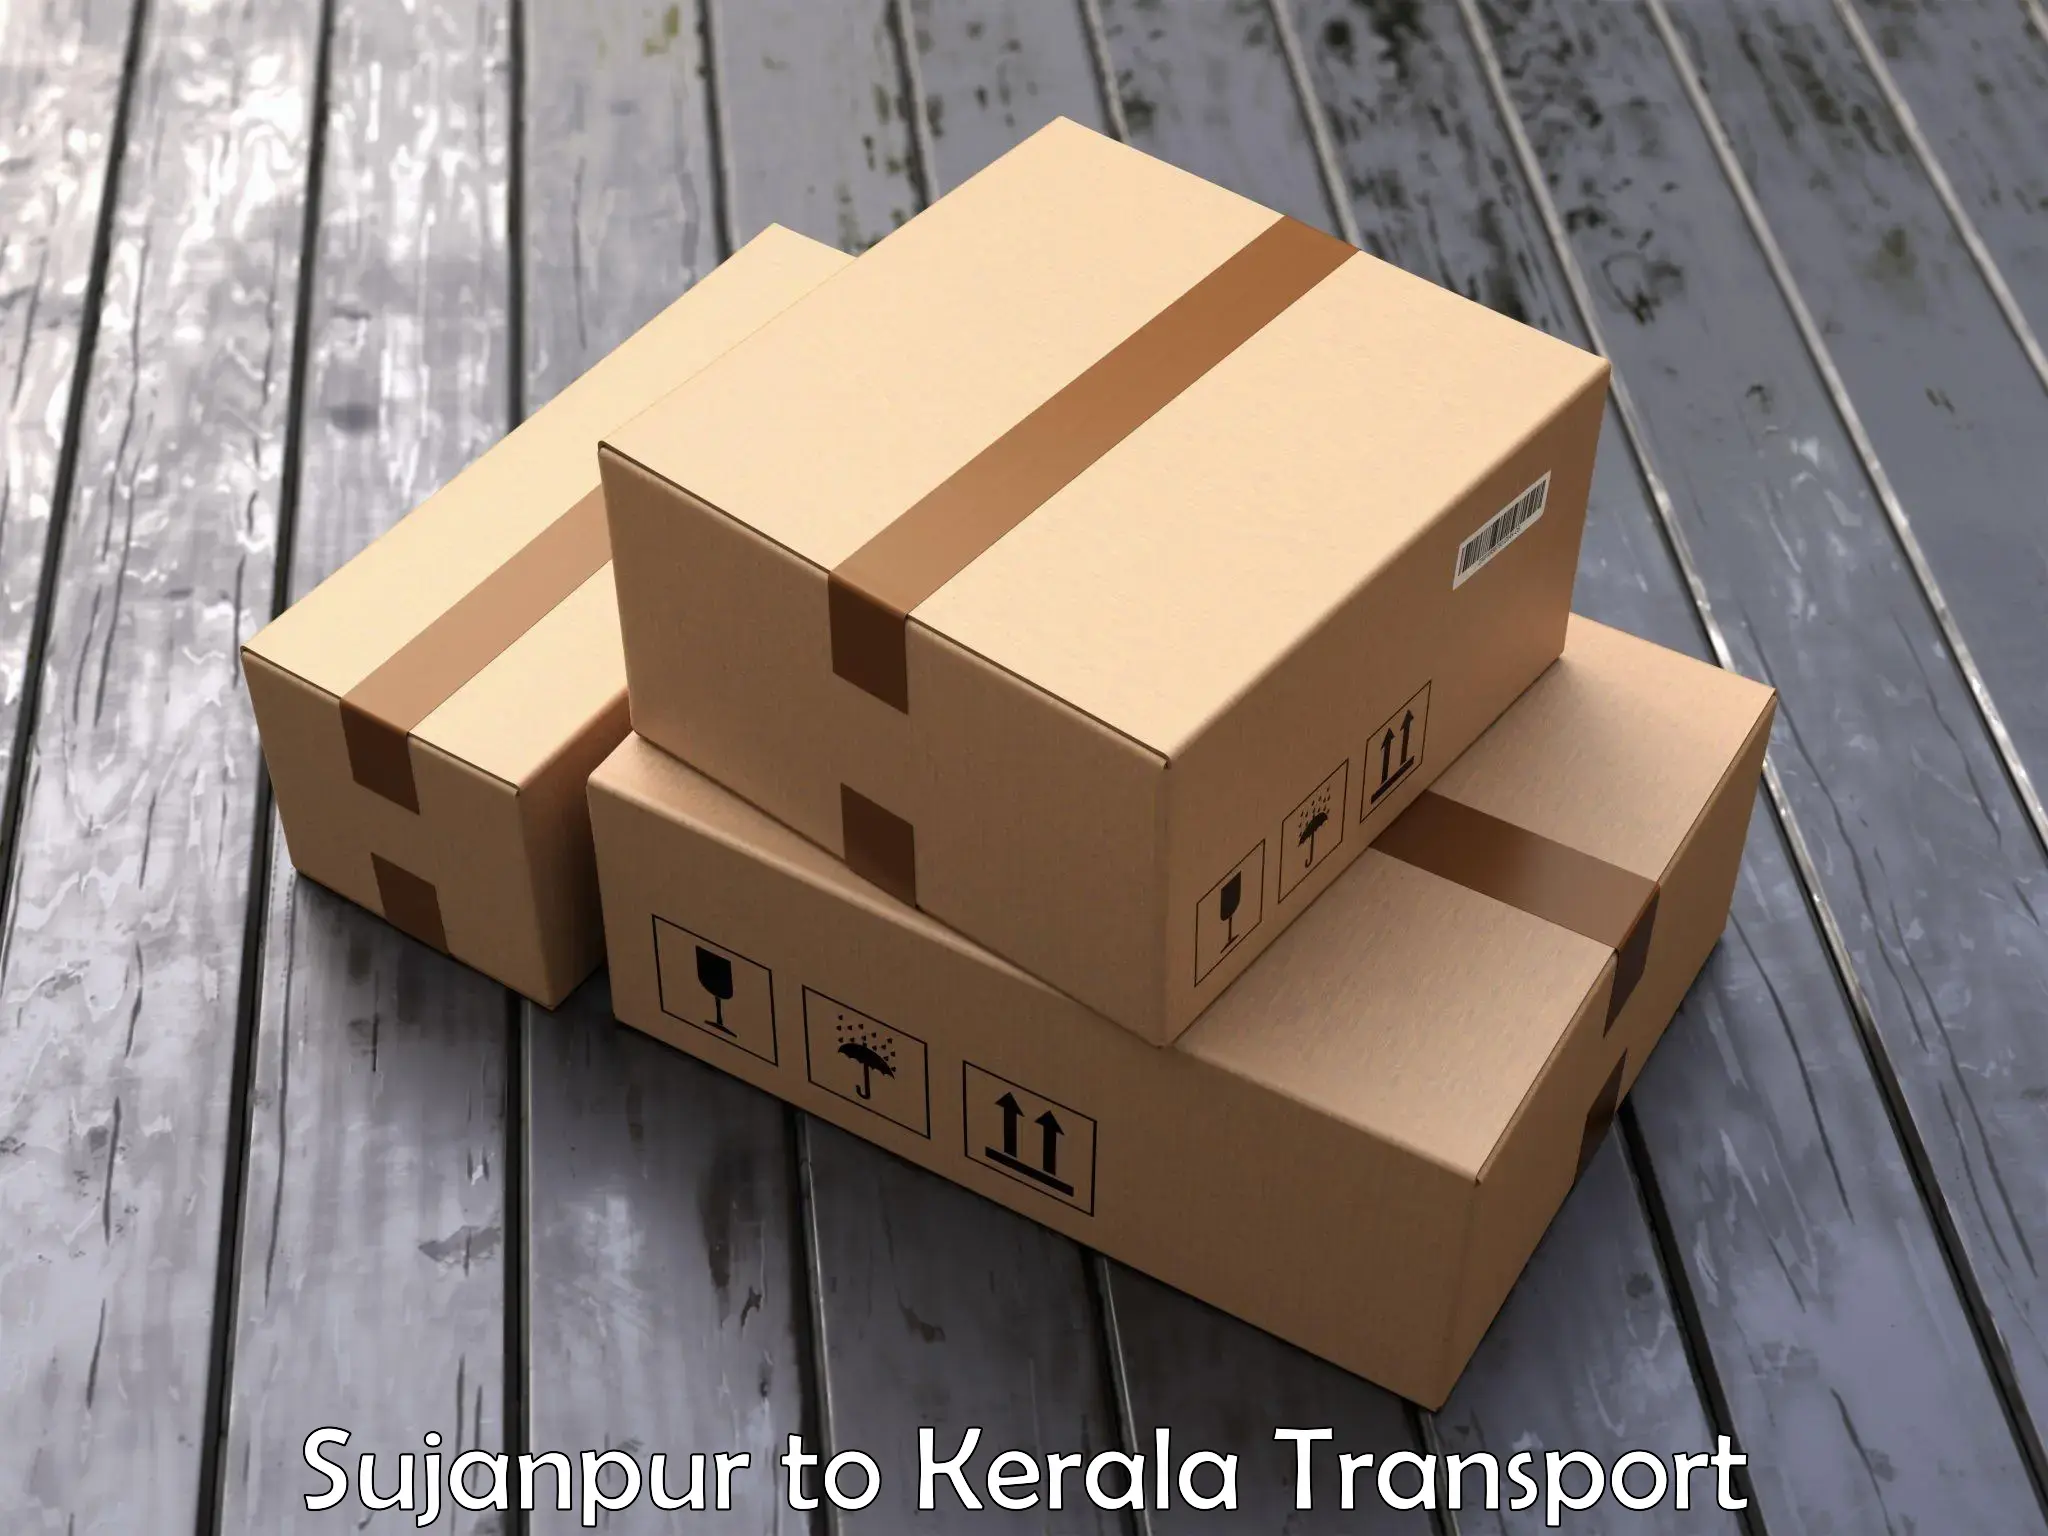 Two wheeler parcel service Sujanpur to Poojapura